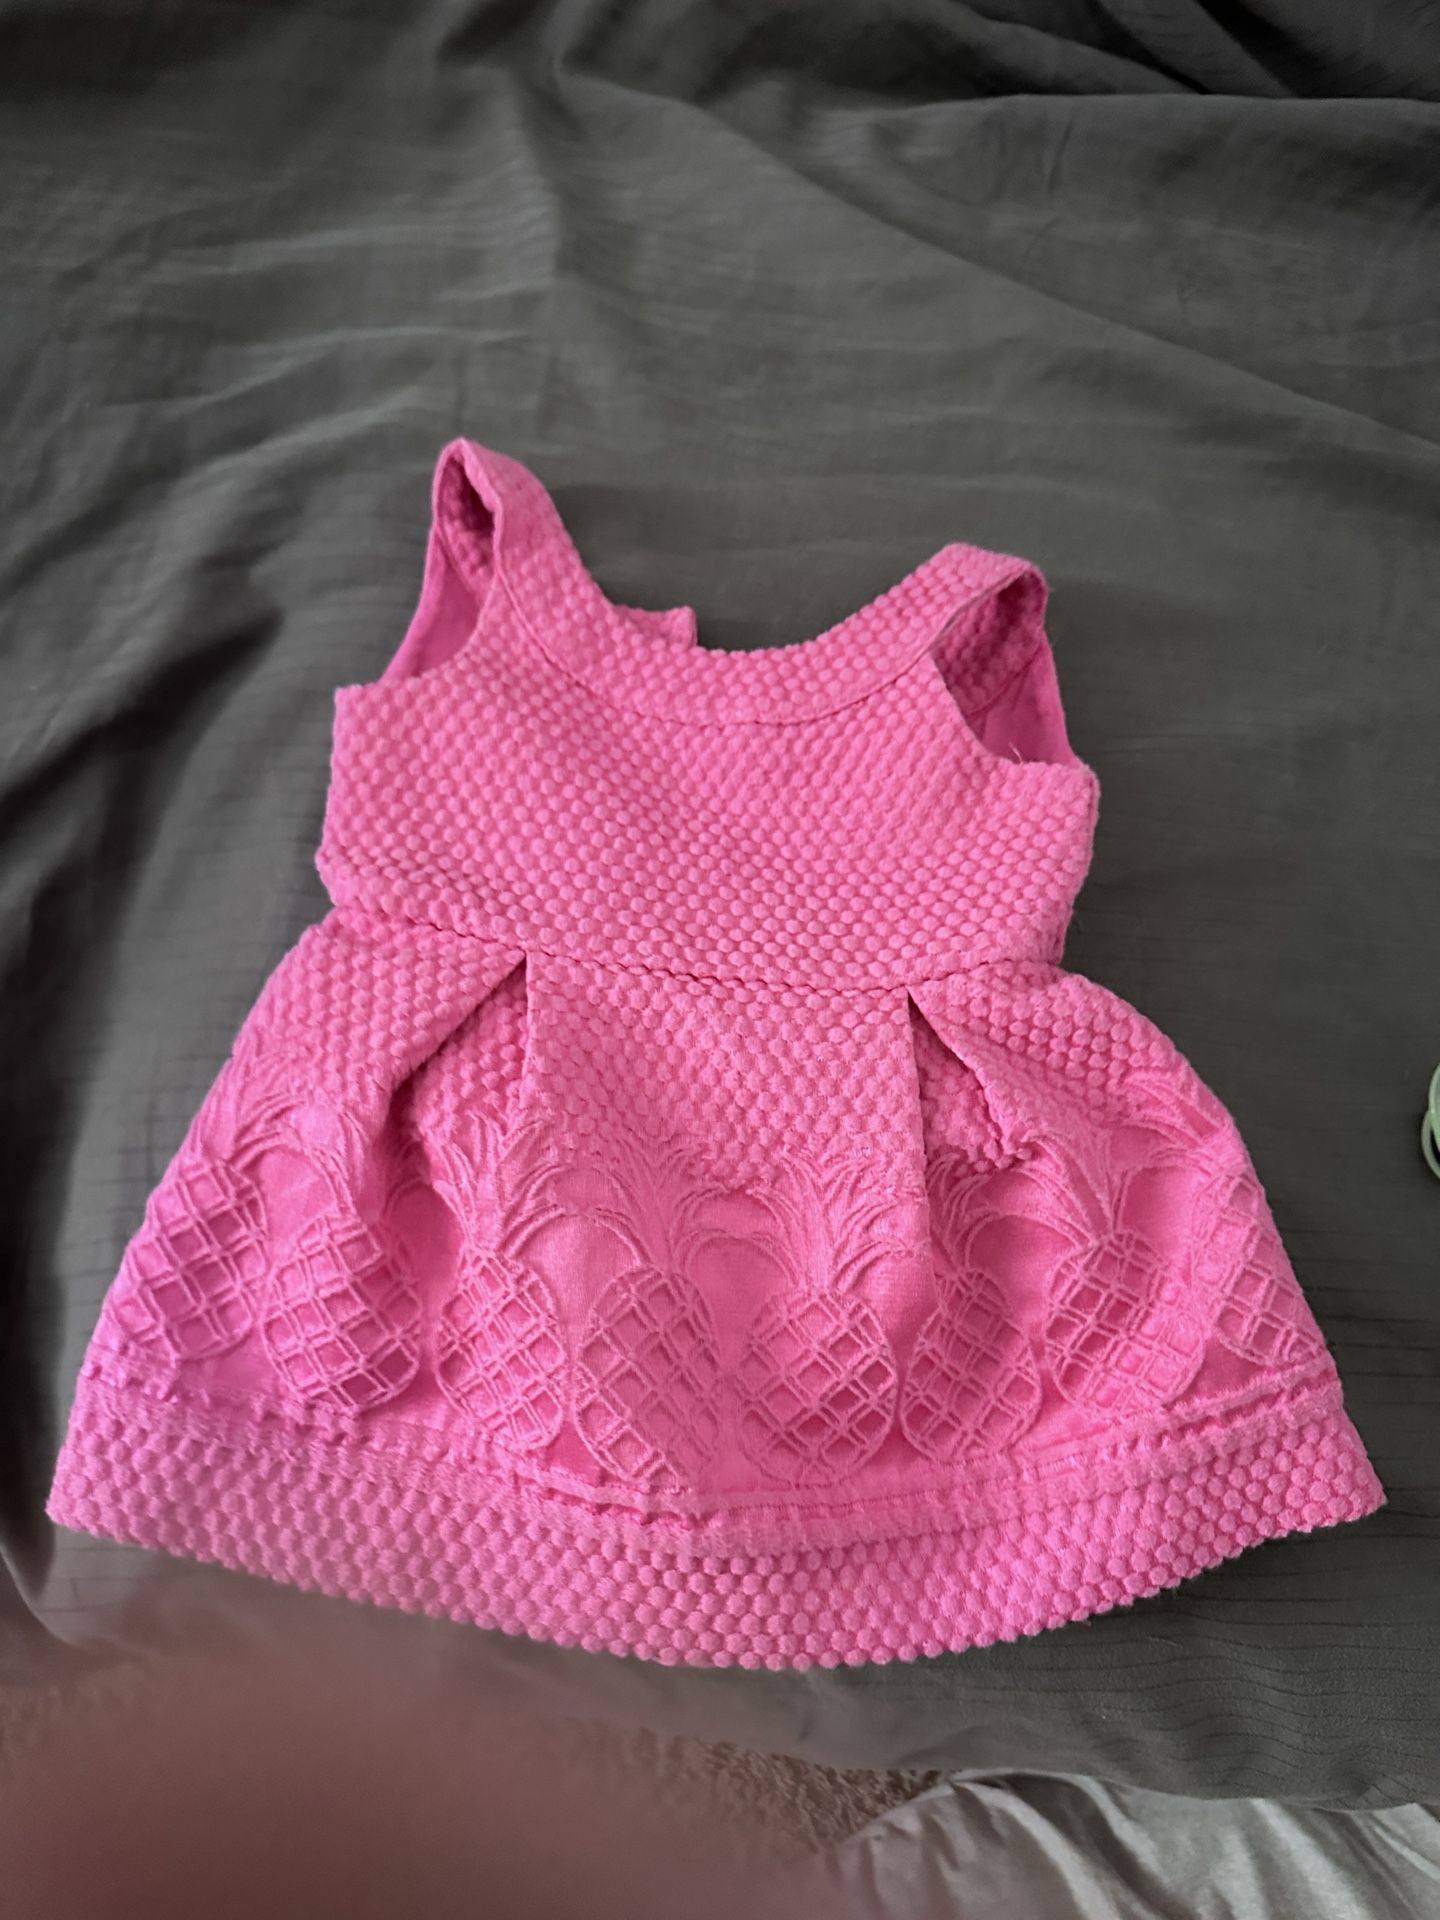 Jeanie And Jack Pink Dress Baby Girl 3-6 month Old